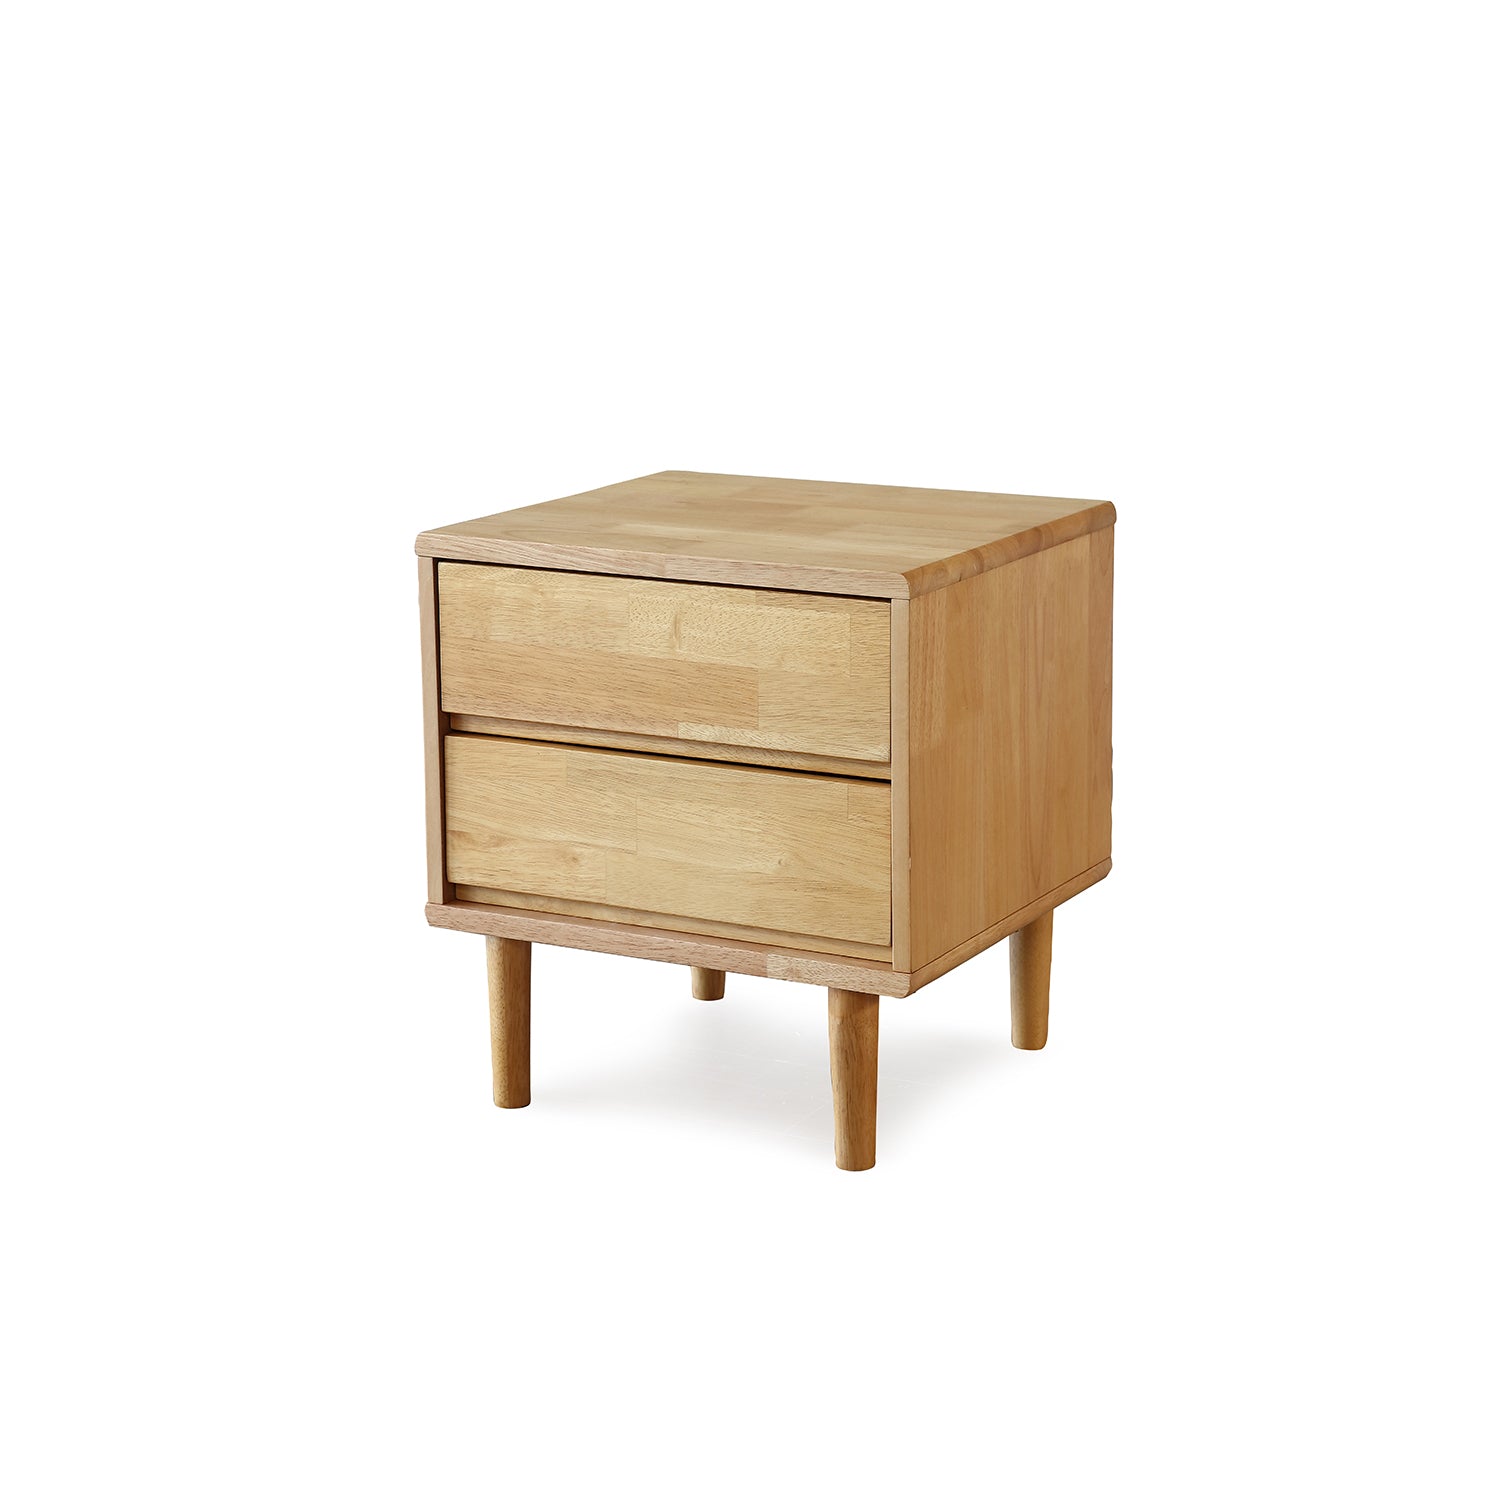 The Charm Nightstand - Set of 2, Night Stand, OHDOME | Valyou Furniture 